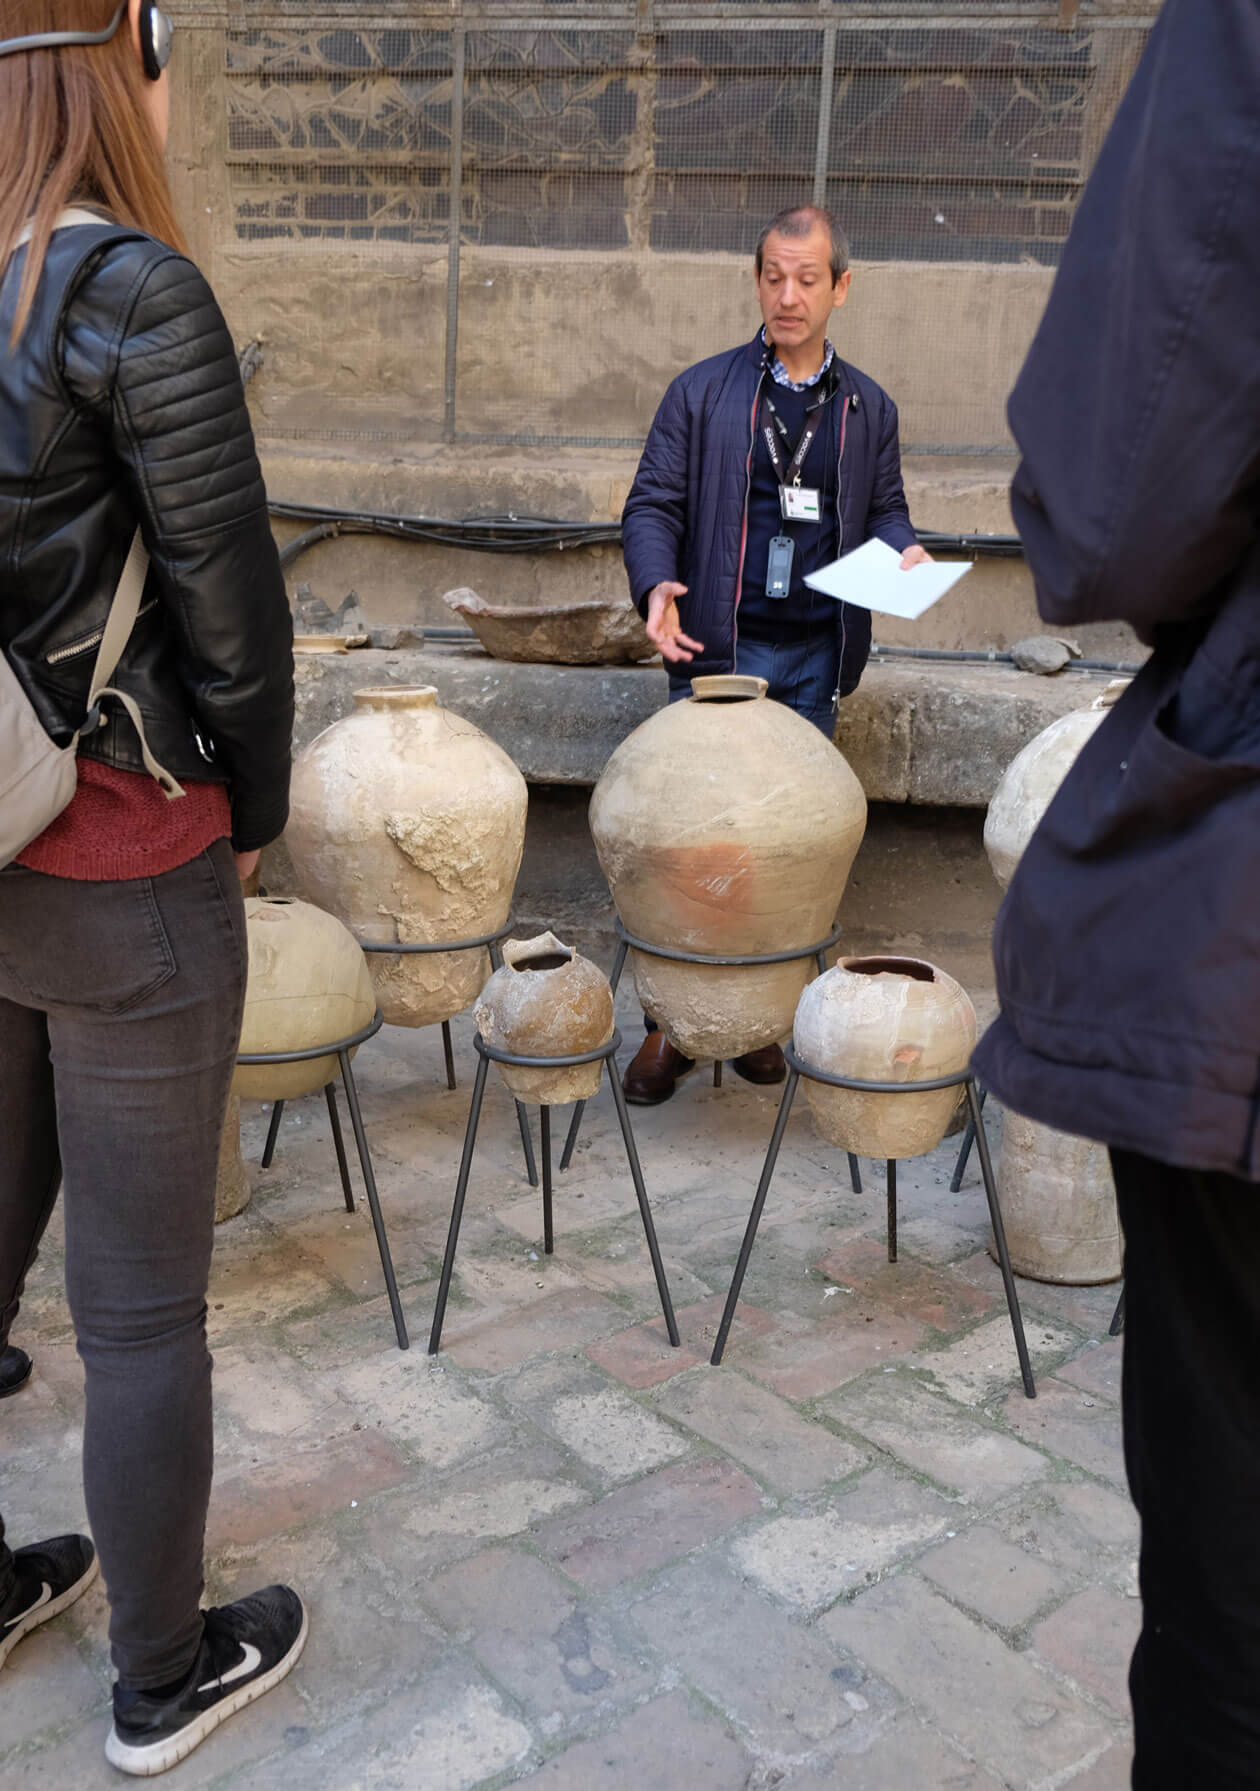 Our guide showing us examples of the terracotta pots which were used to fill the roof cavities